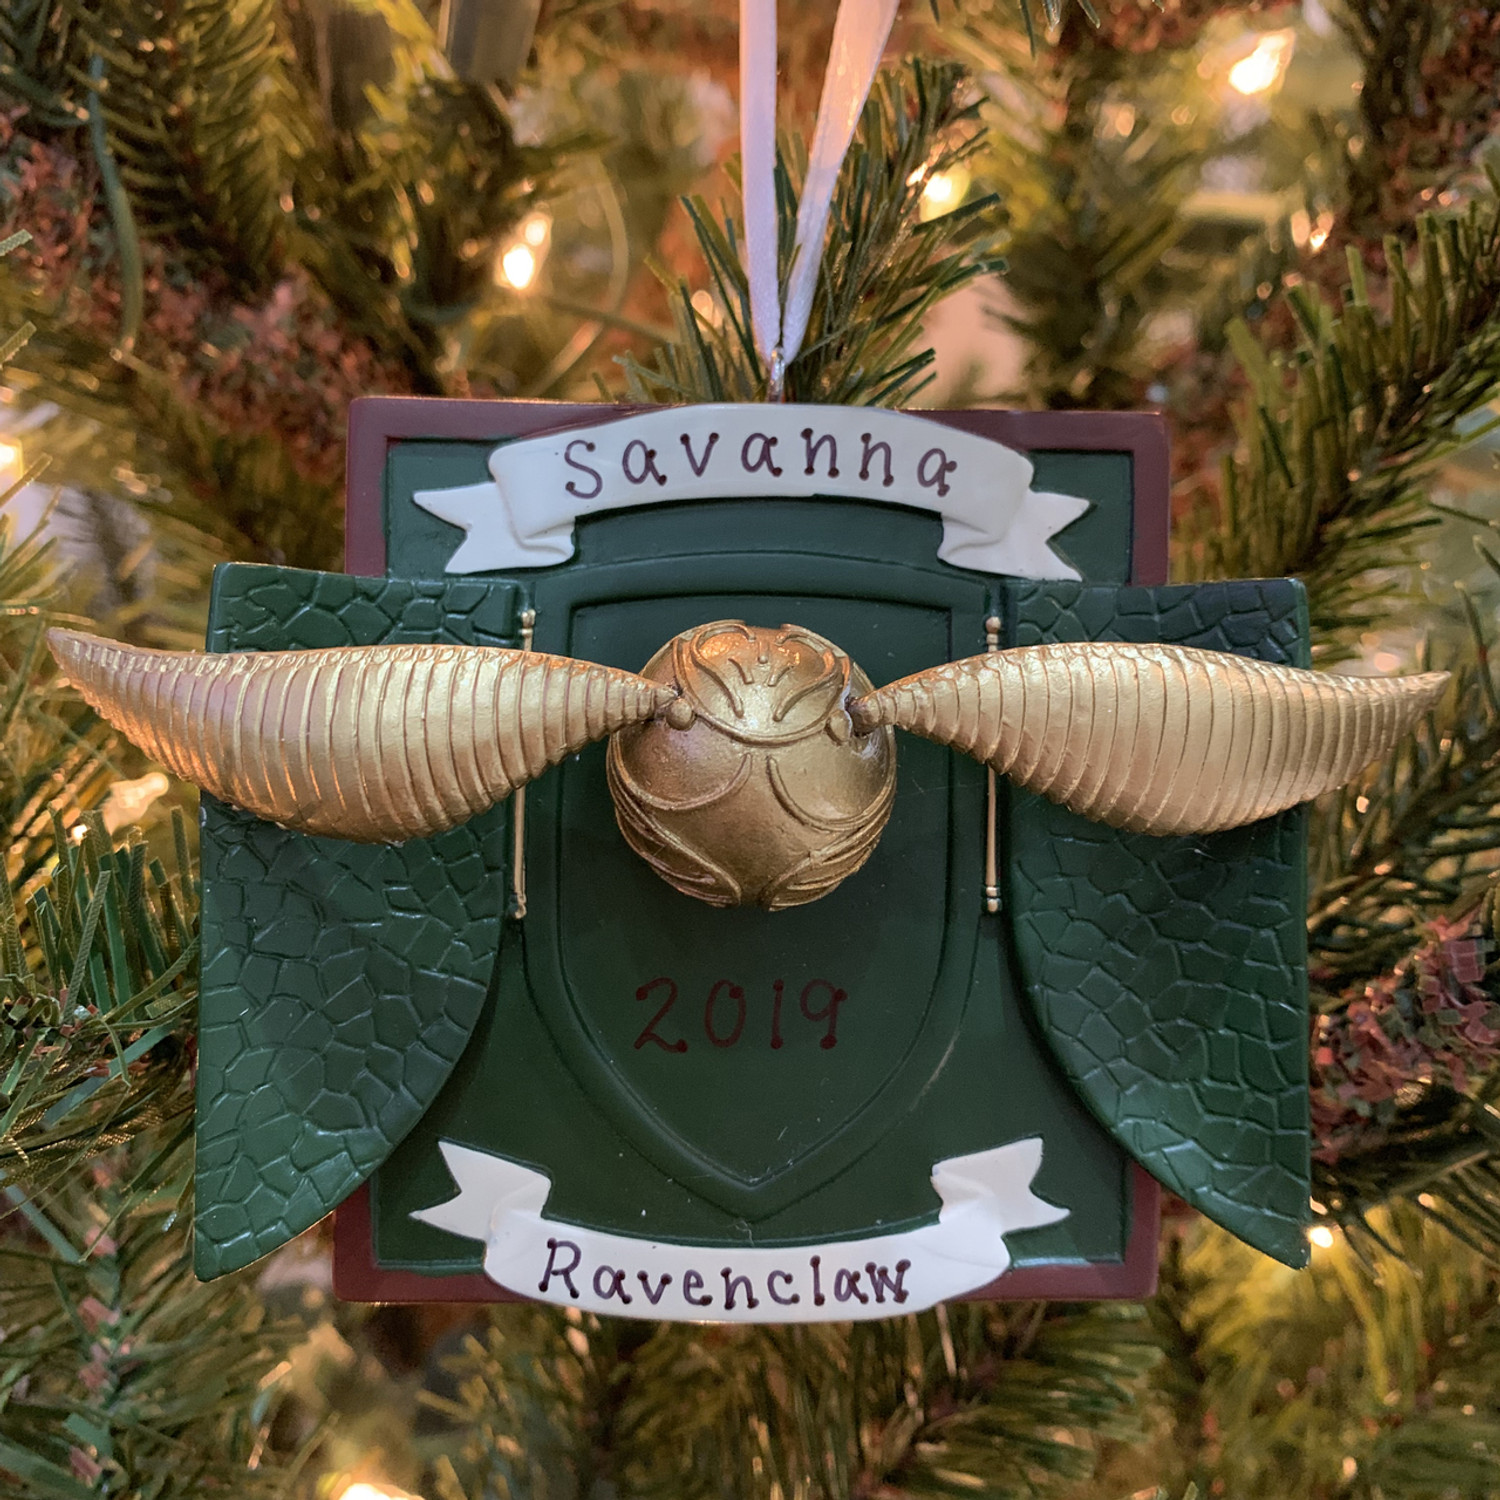 You Can Get Harry Potter Light Up Ornaments For Your Christmas